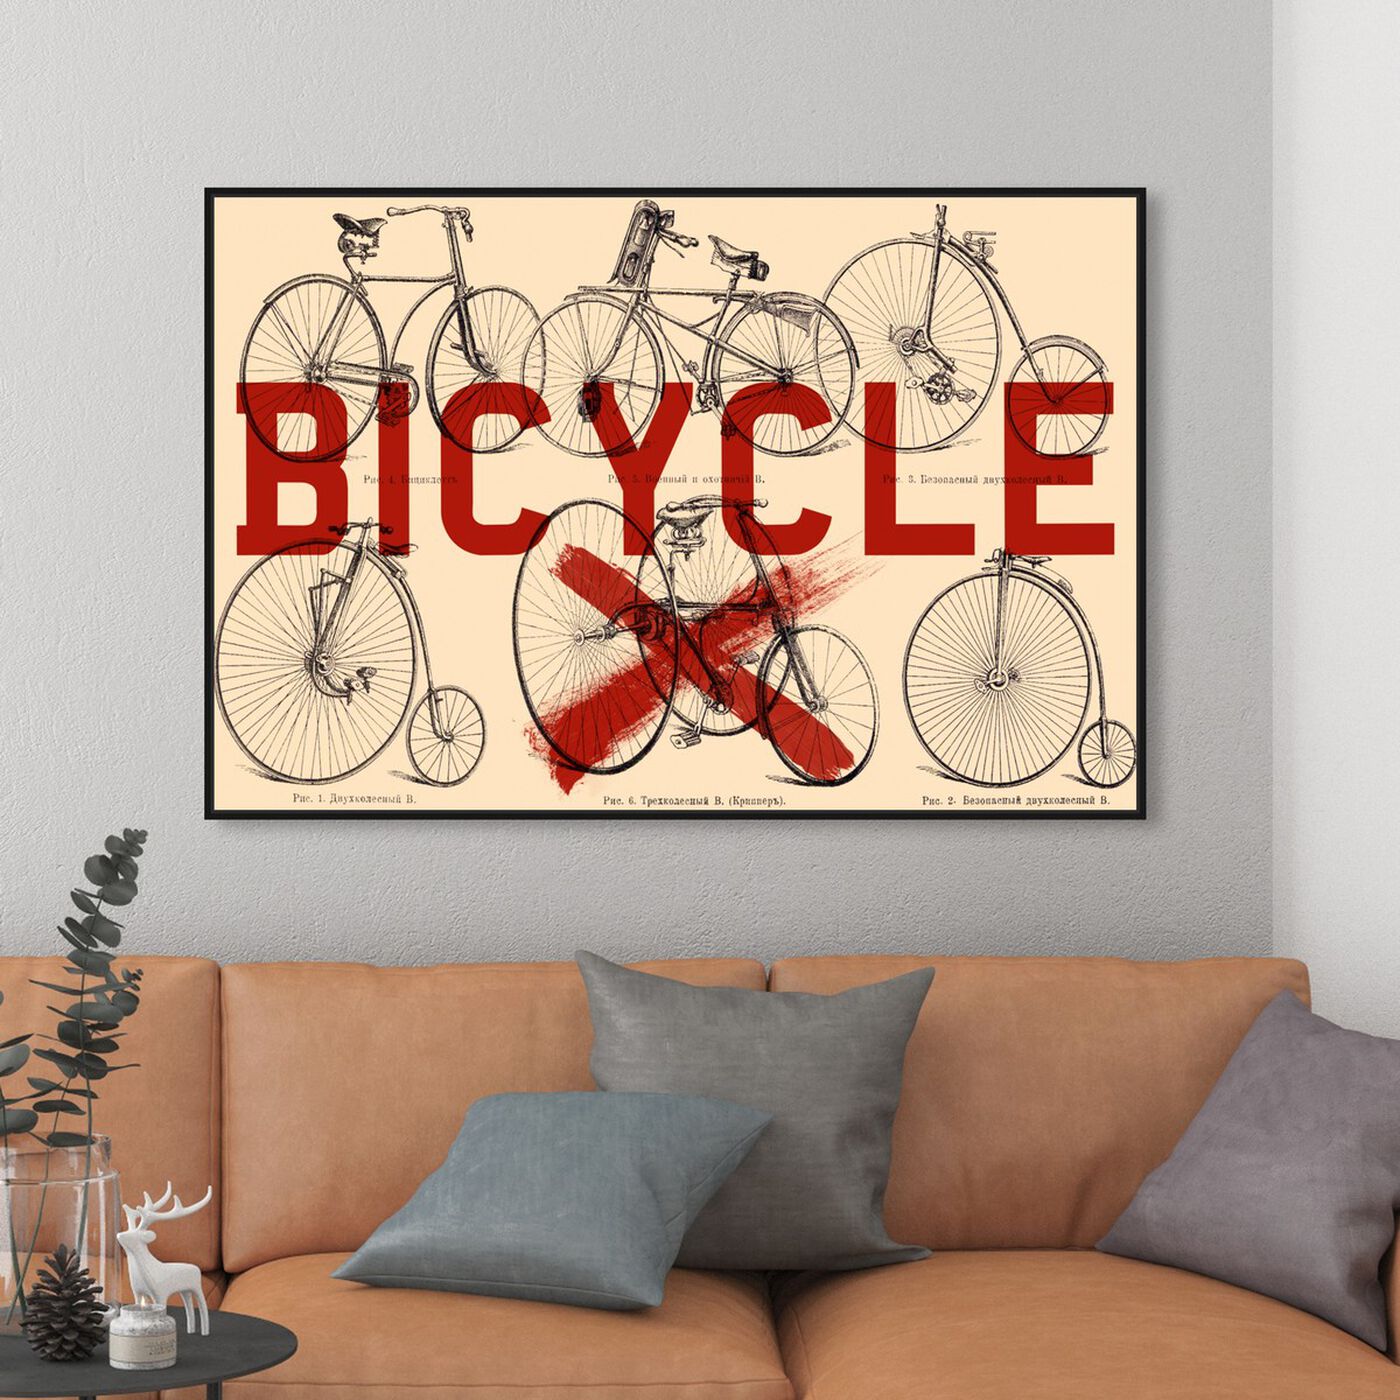 Hanging view of Bicycle featuring transportation and bicycles art.